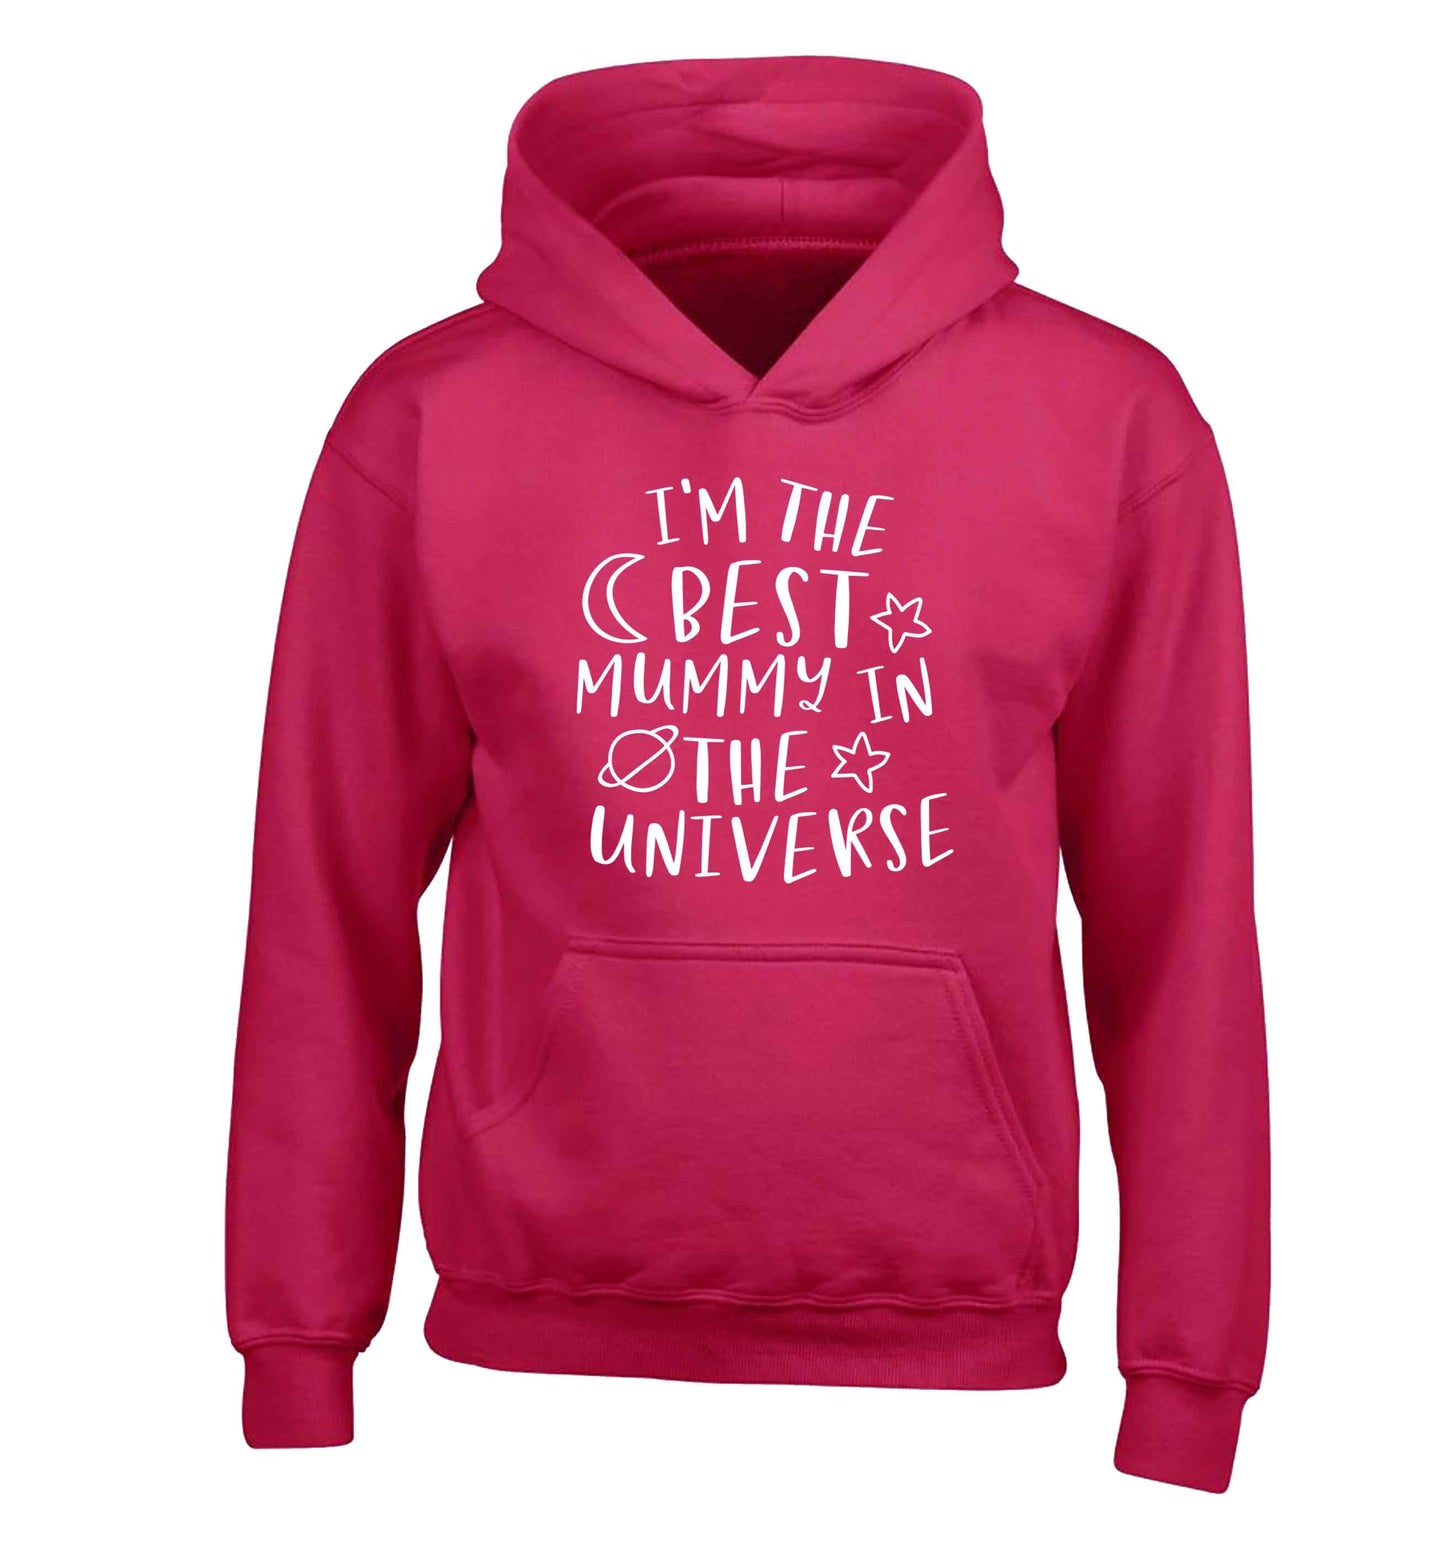 I'm the best mummy in the universe children's pink hoodie 12-13 Years